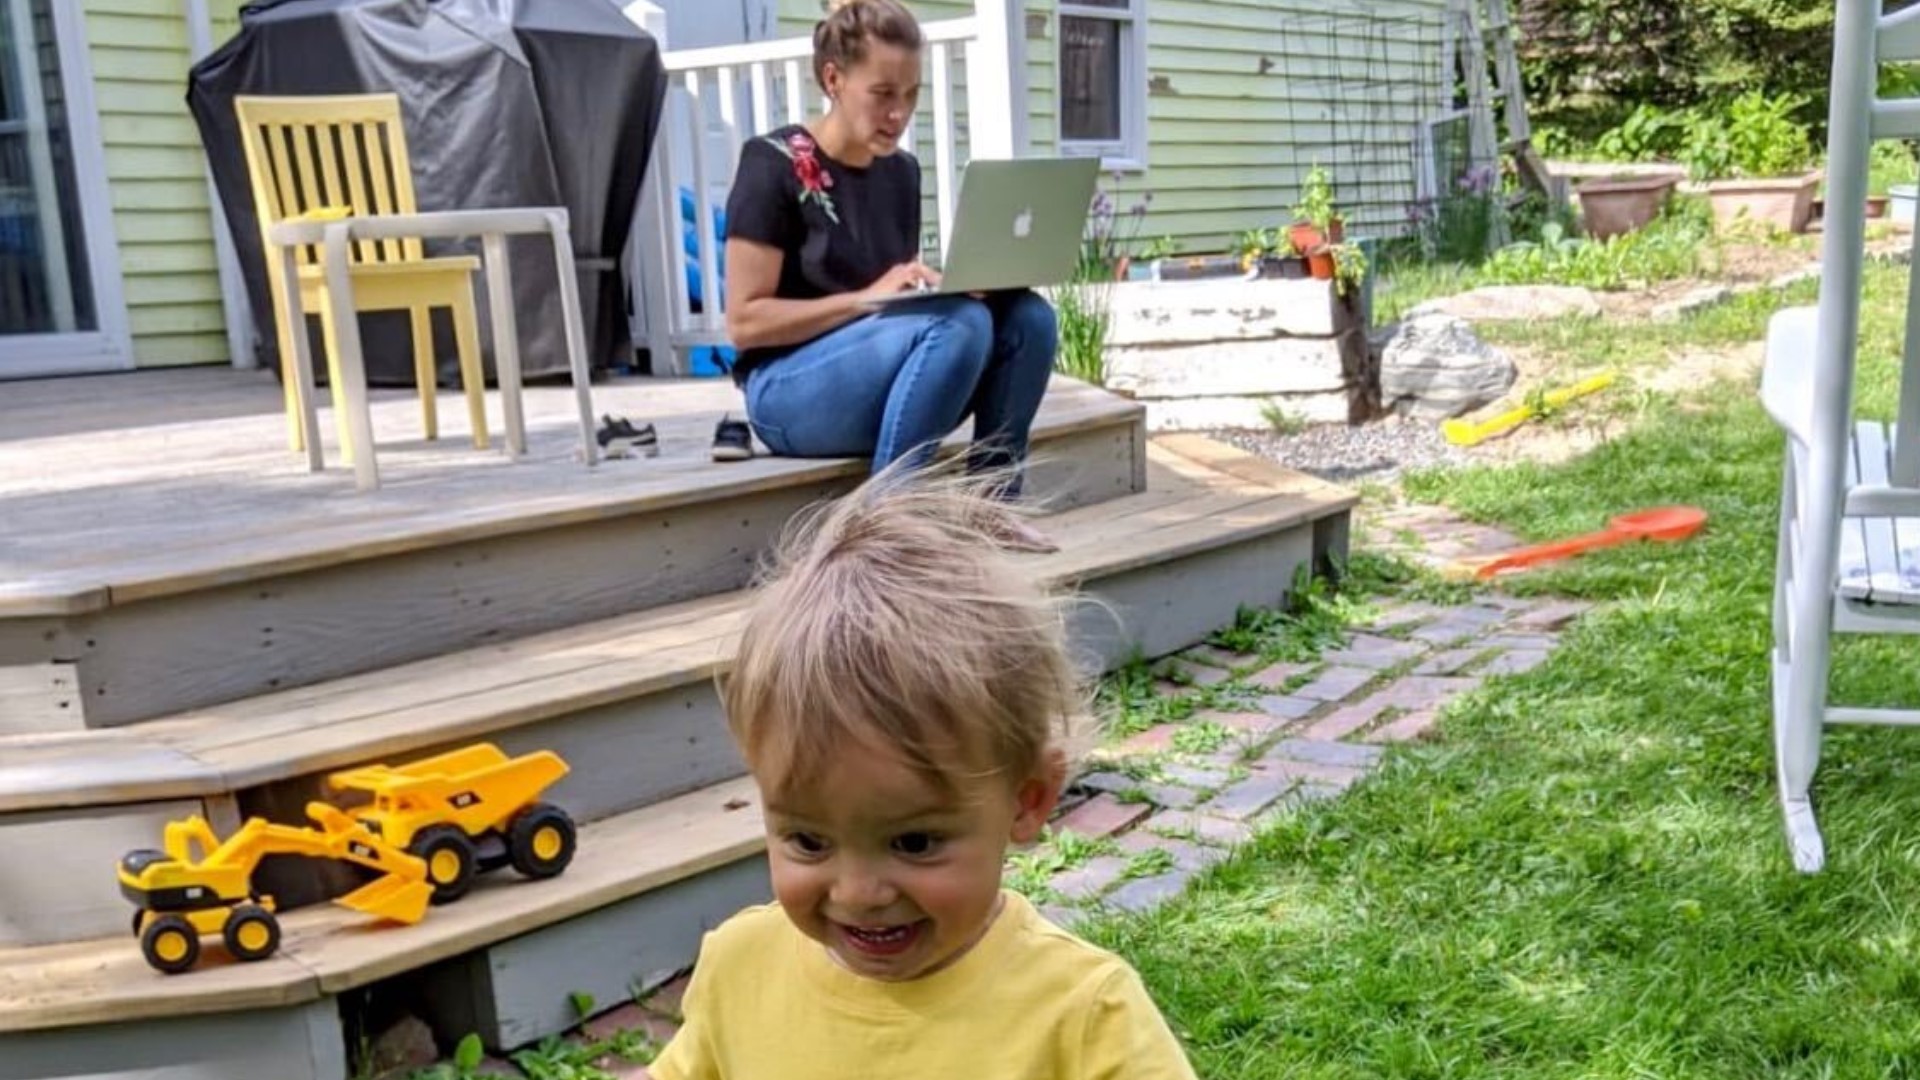 Parents balancing work, kids struggle as Maine child care providers are hit hard by pandemic